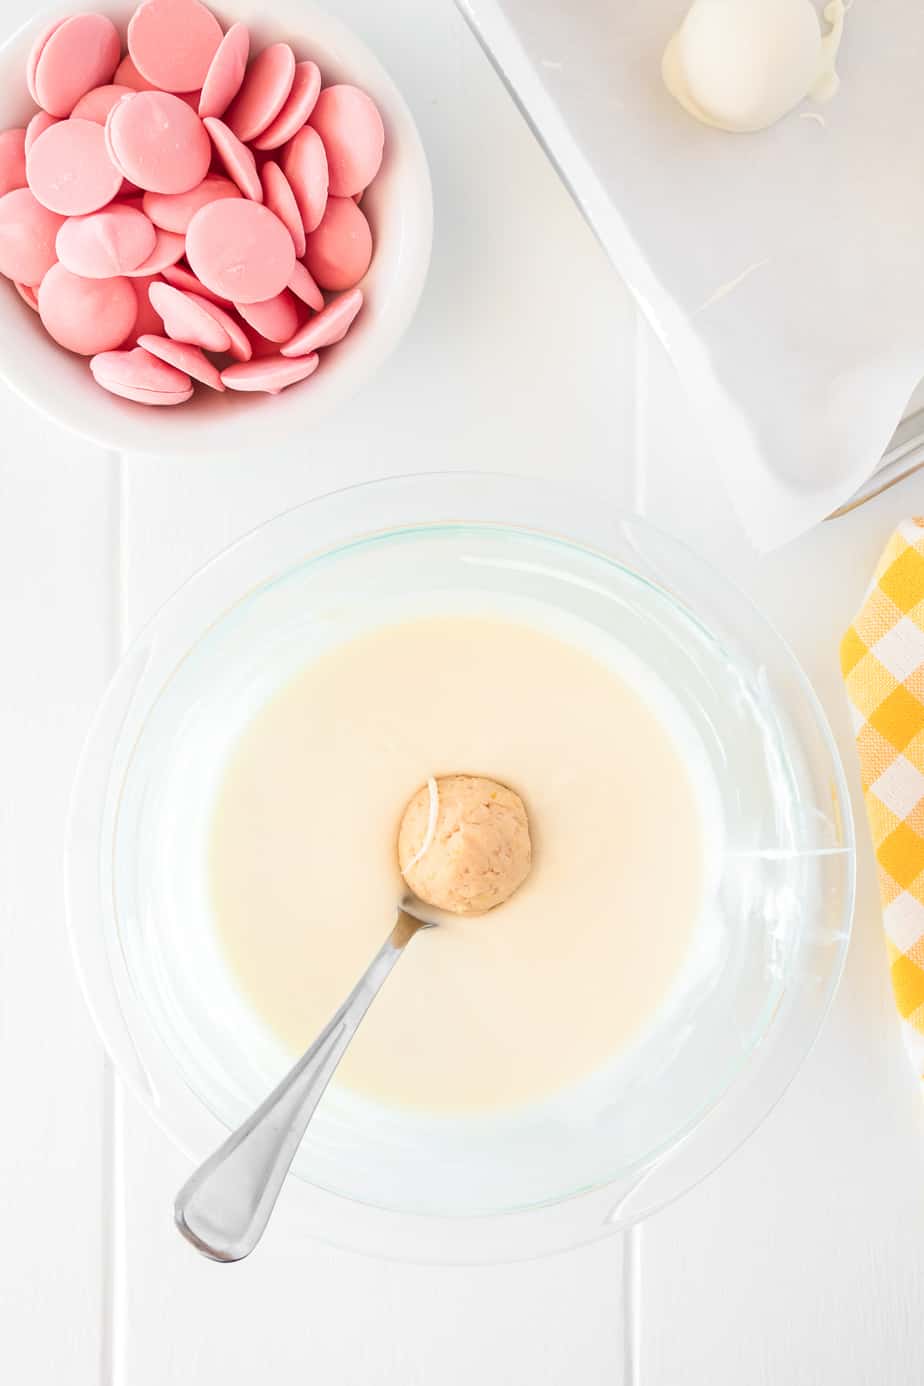 Dipping strawberry lemonade truffles in a bowl of melted white chocolate with a fork. A pan of more truffles and a bowl of pink candy melts sit nearby